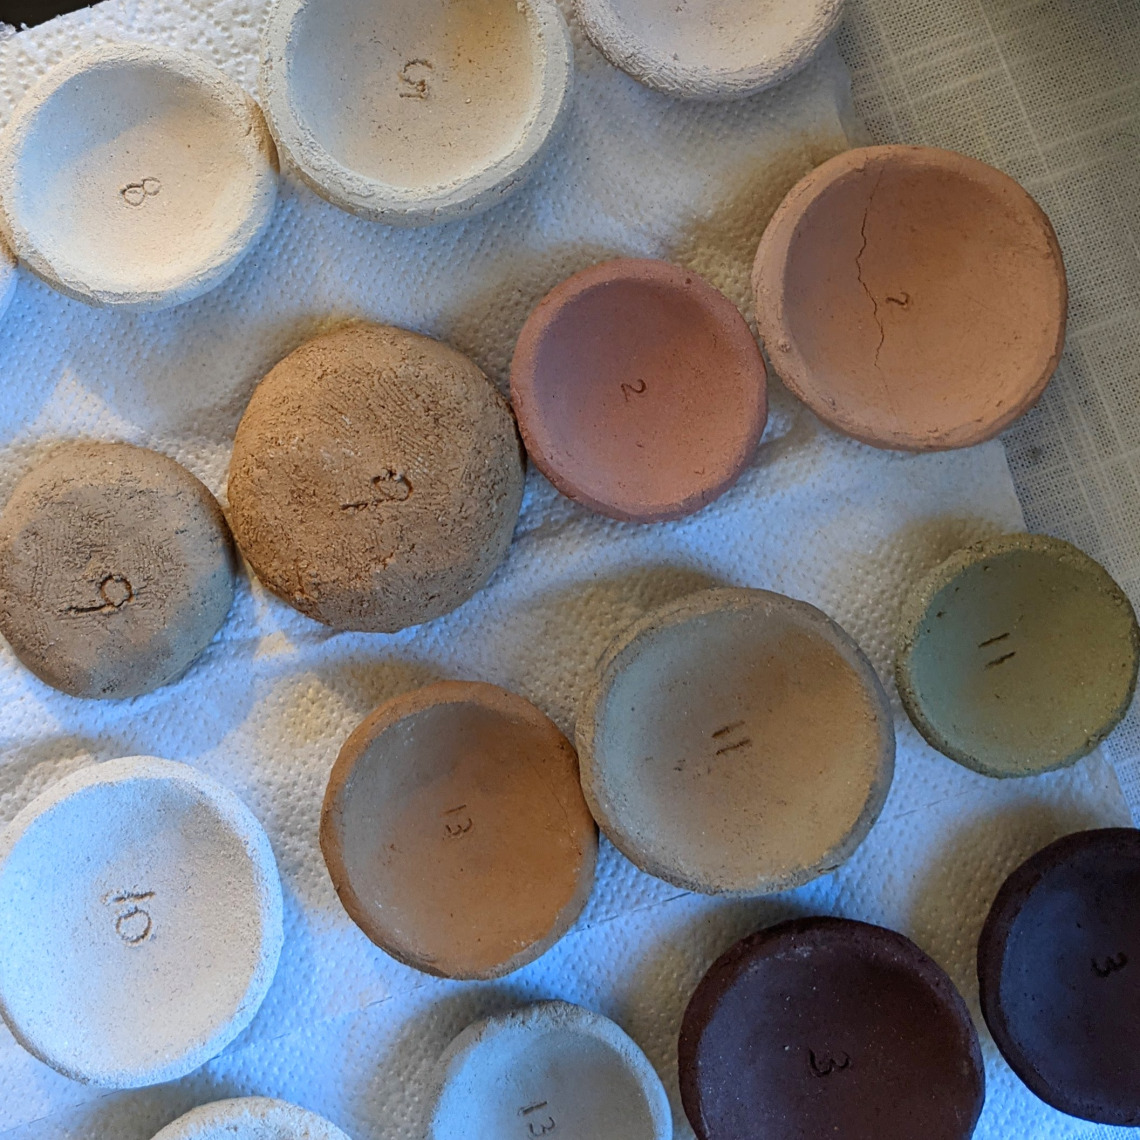 Small pottery samples in a variety of clays/colors